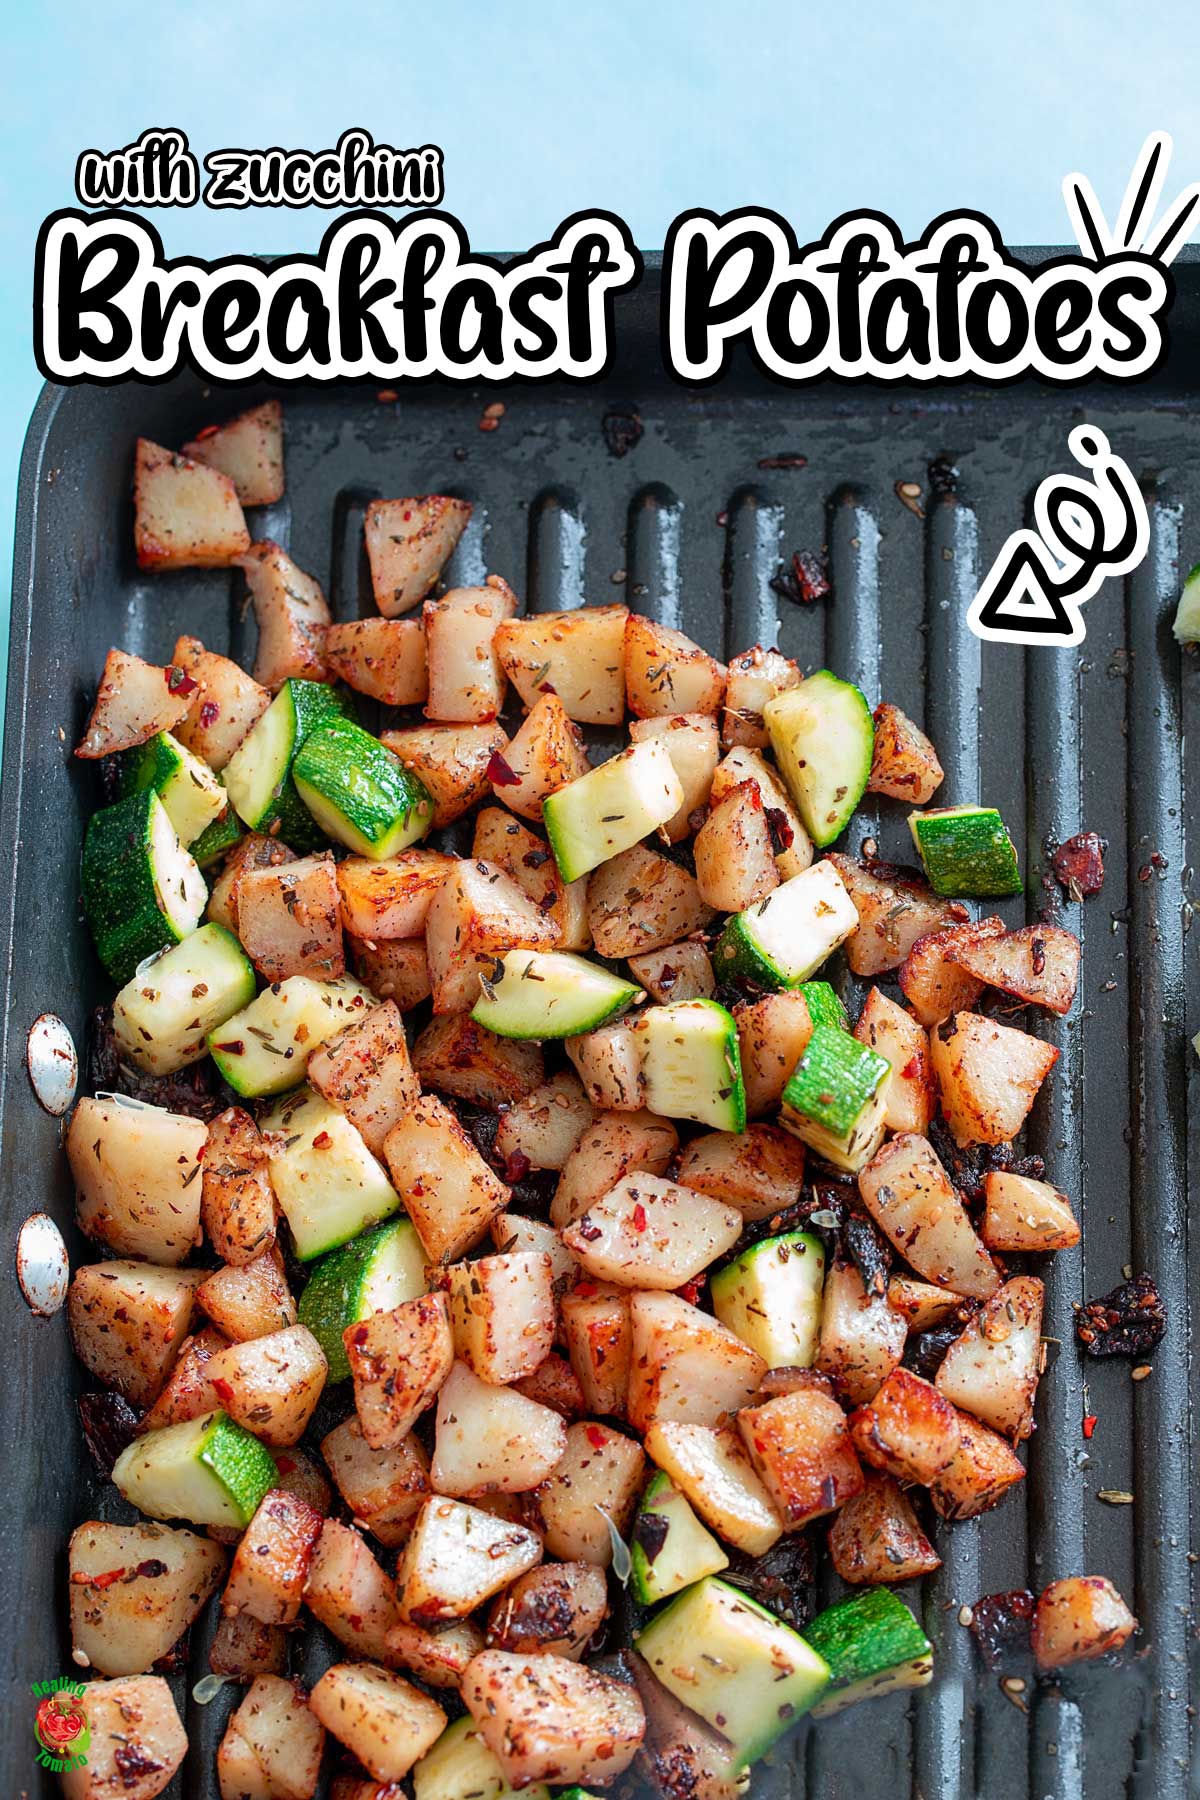 Top view of breakfast potatoes with zucchini in a stove top grill